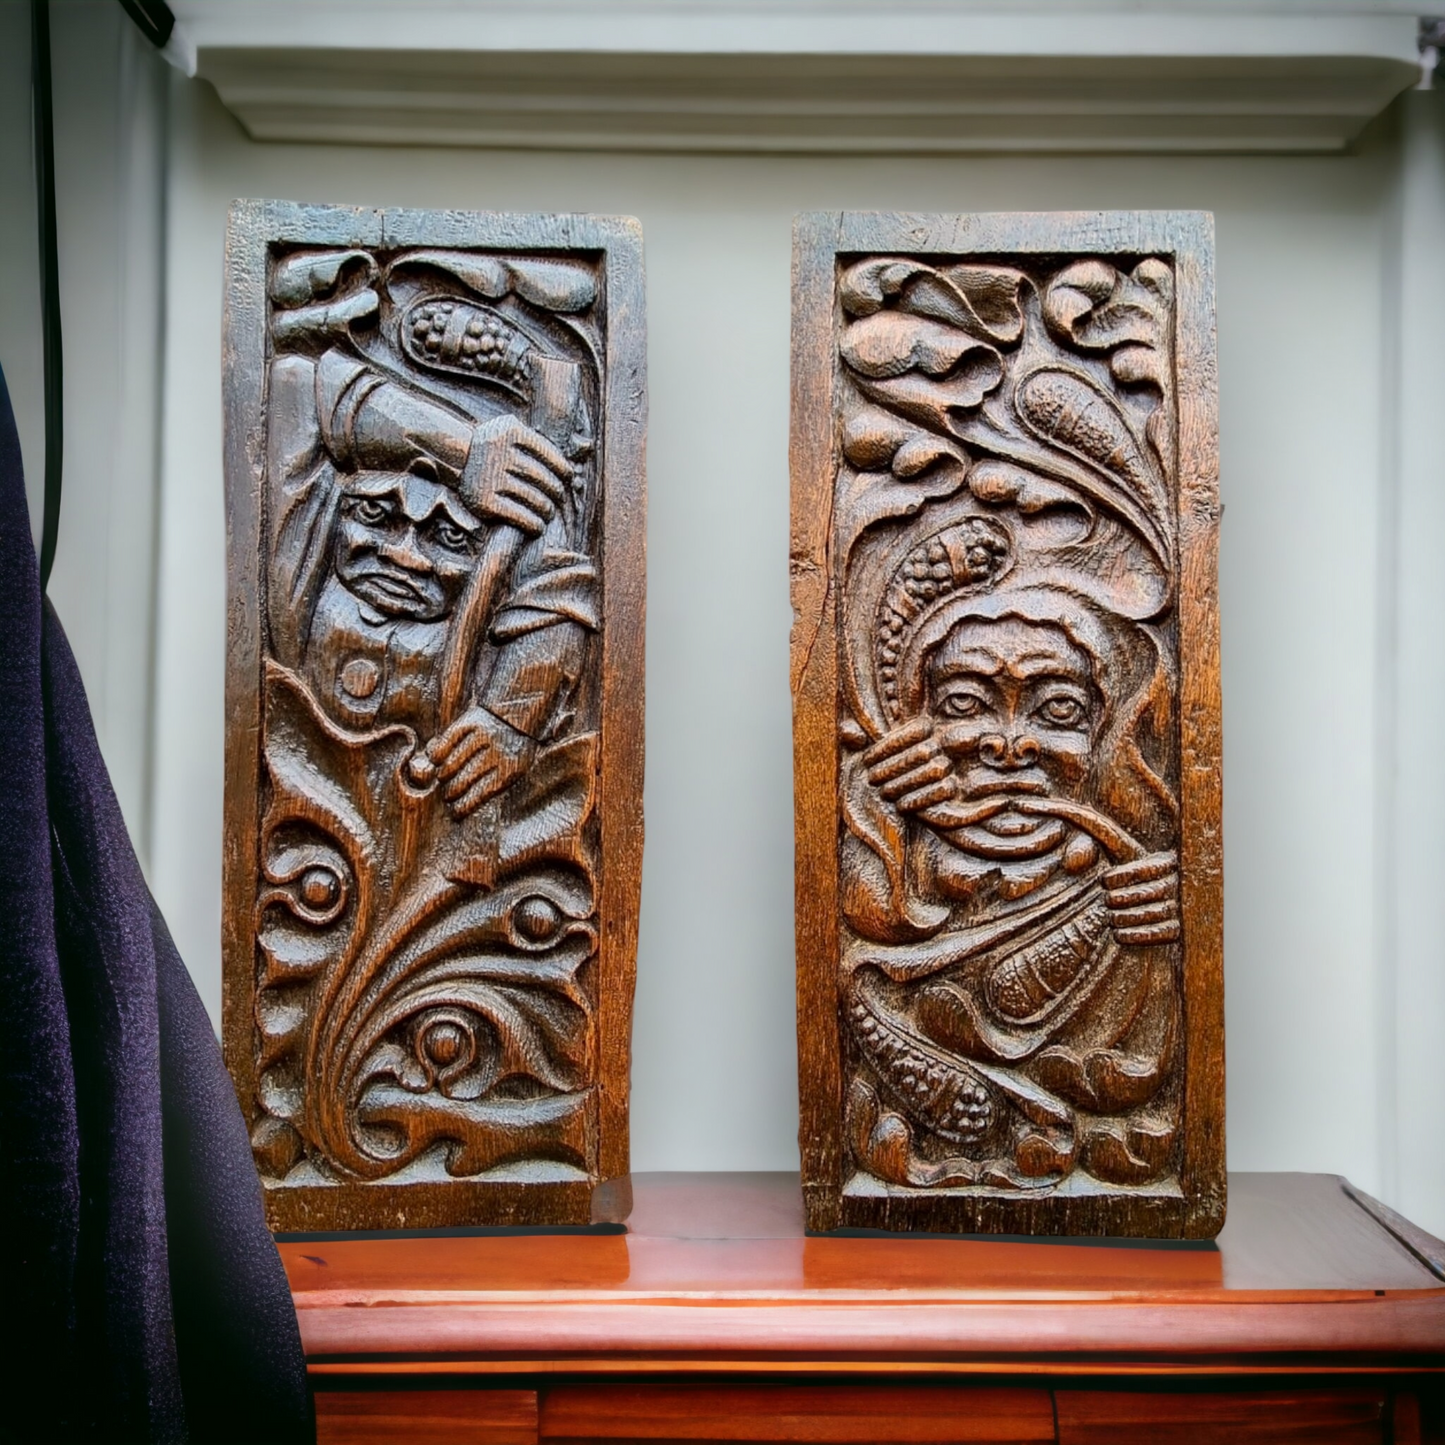 Rare Pair of 16th Century Dutch Antique Carved Oak Panels Depicting Wild Men of The Woods or Woodwose / Wodewose